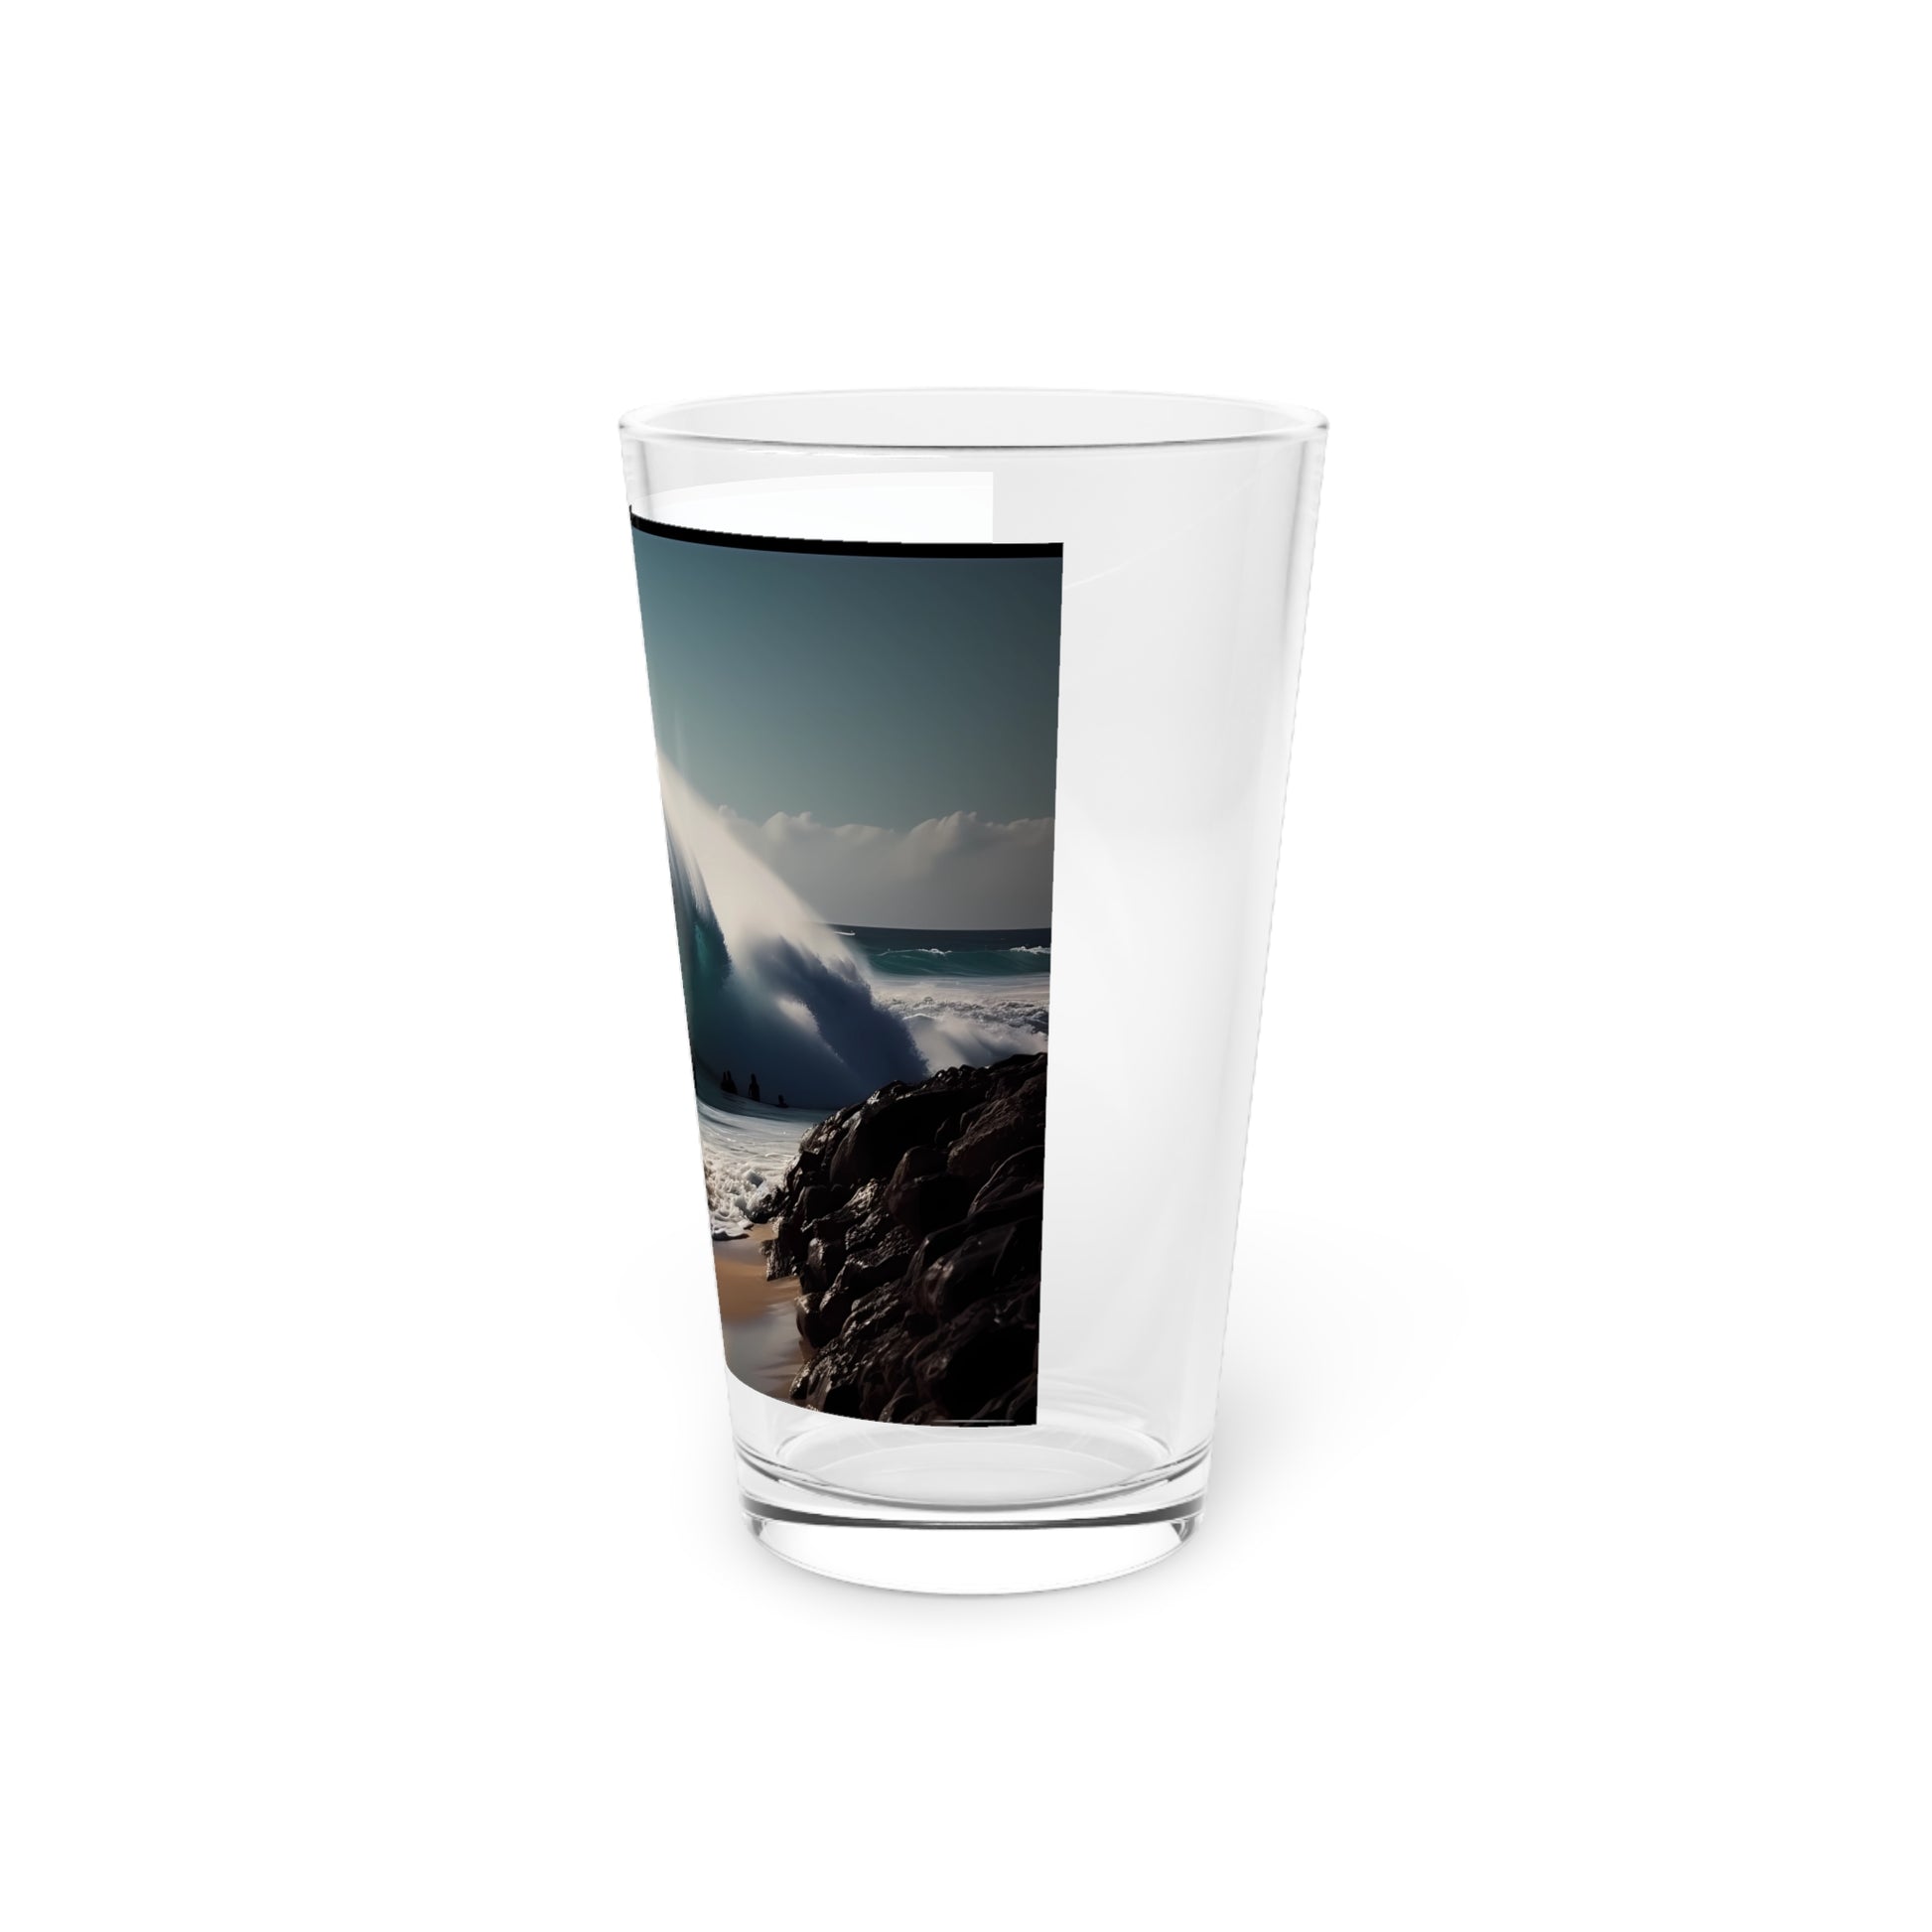 Ride the waves of creativity with Pipeline: North Shore, Oahu Perfect Wave Pint Glass. Surf artistry meets reality, exclusively at Stashbox.ai.